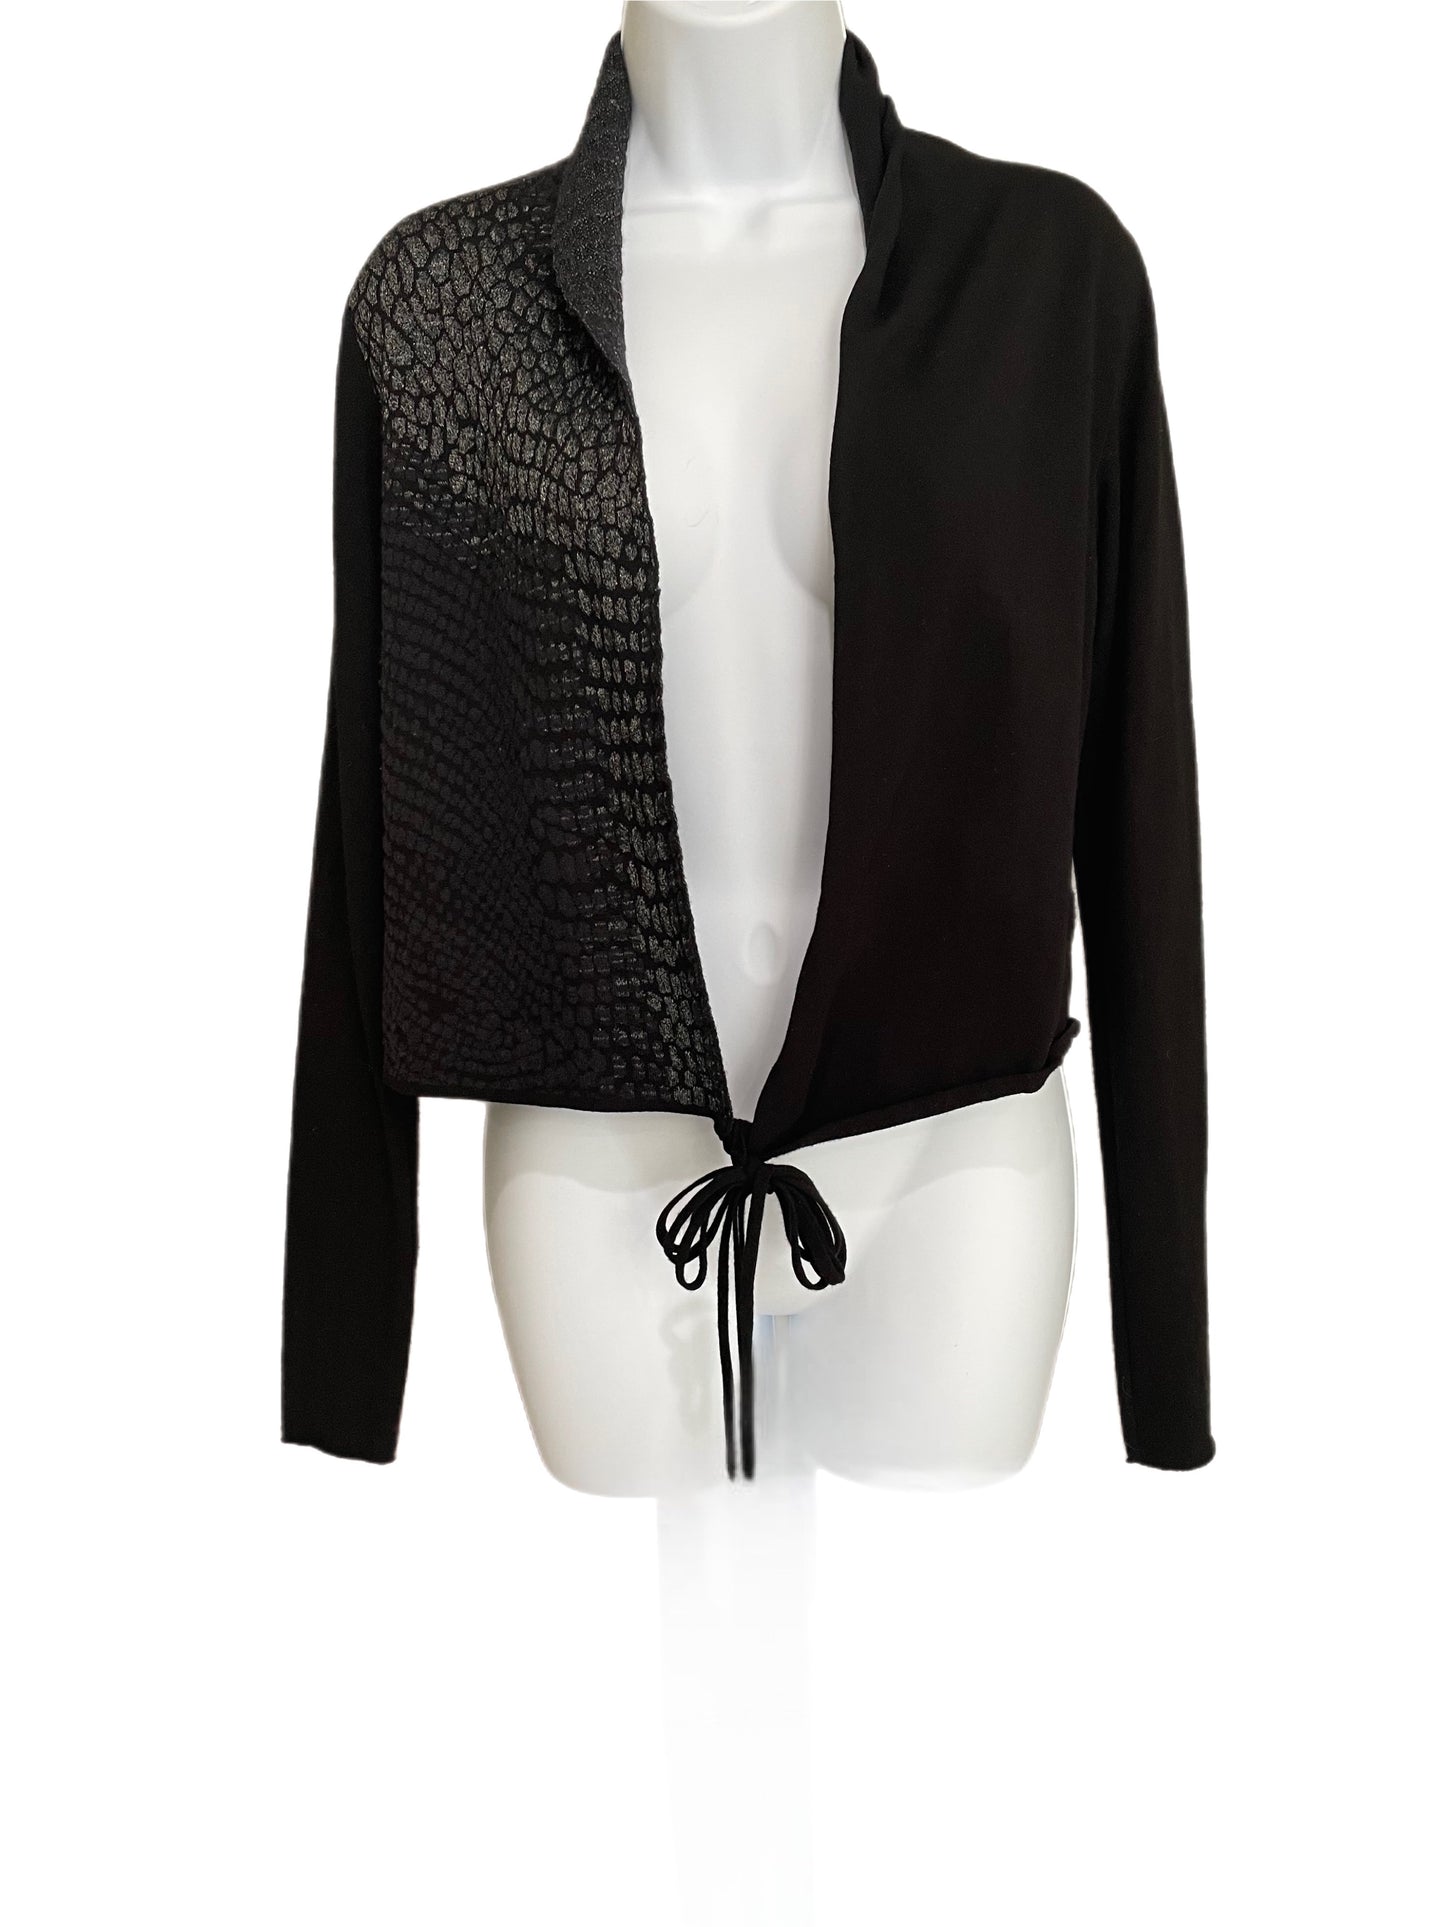 Sweater-Black Open Front Tie By Sarah Pacini